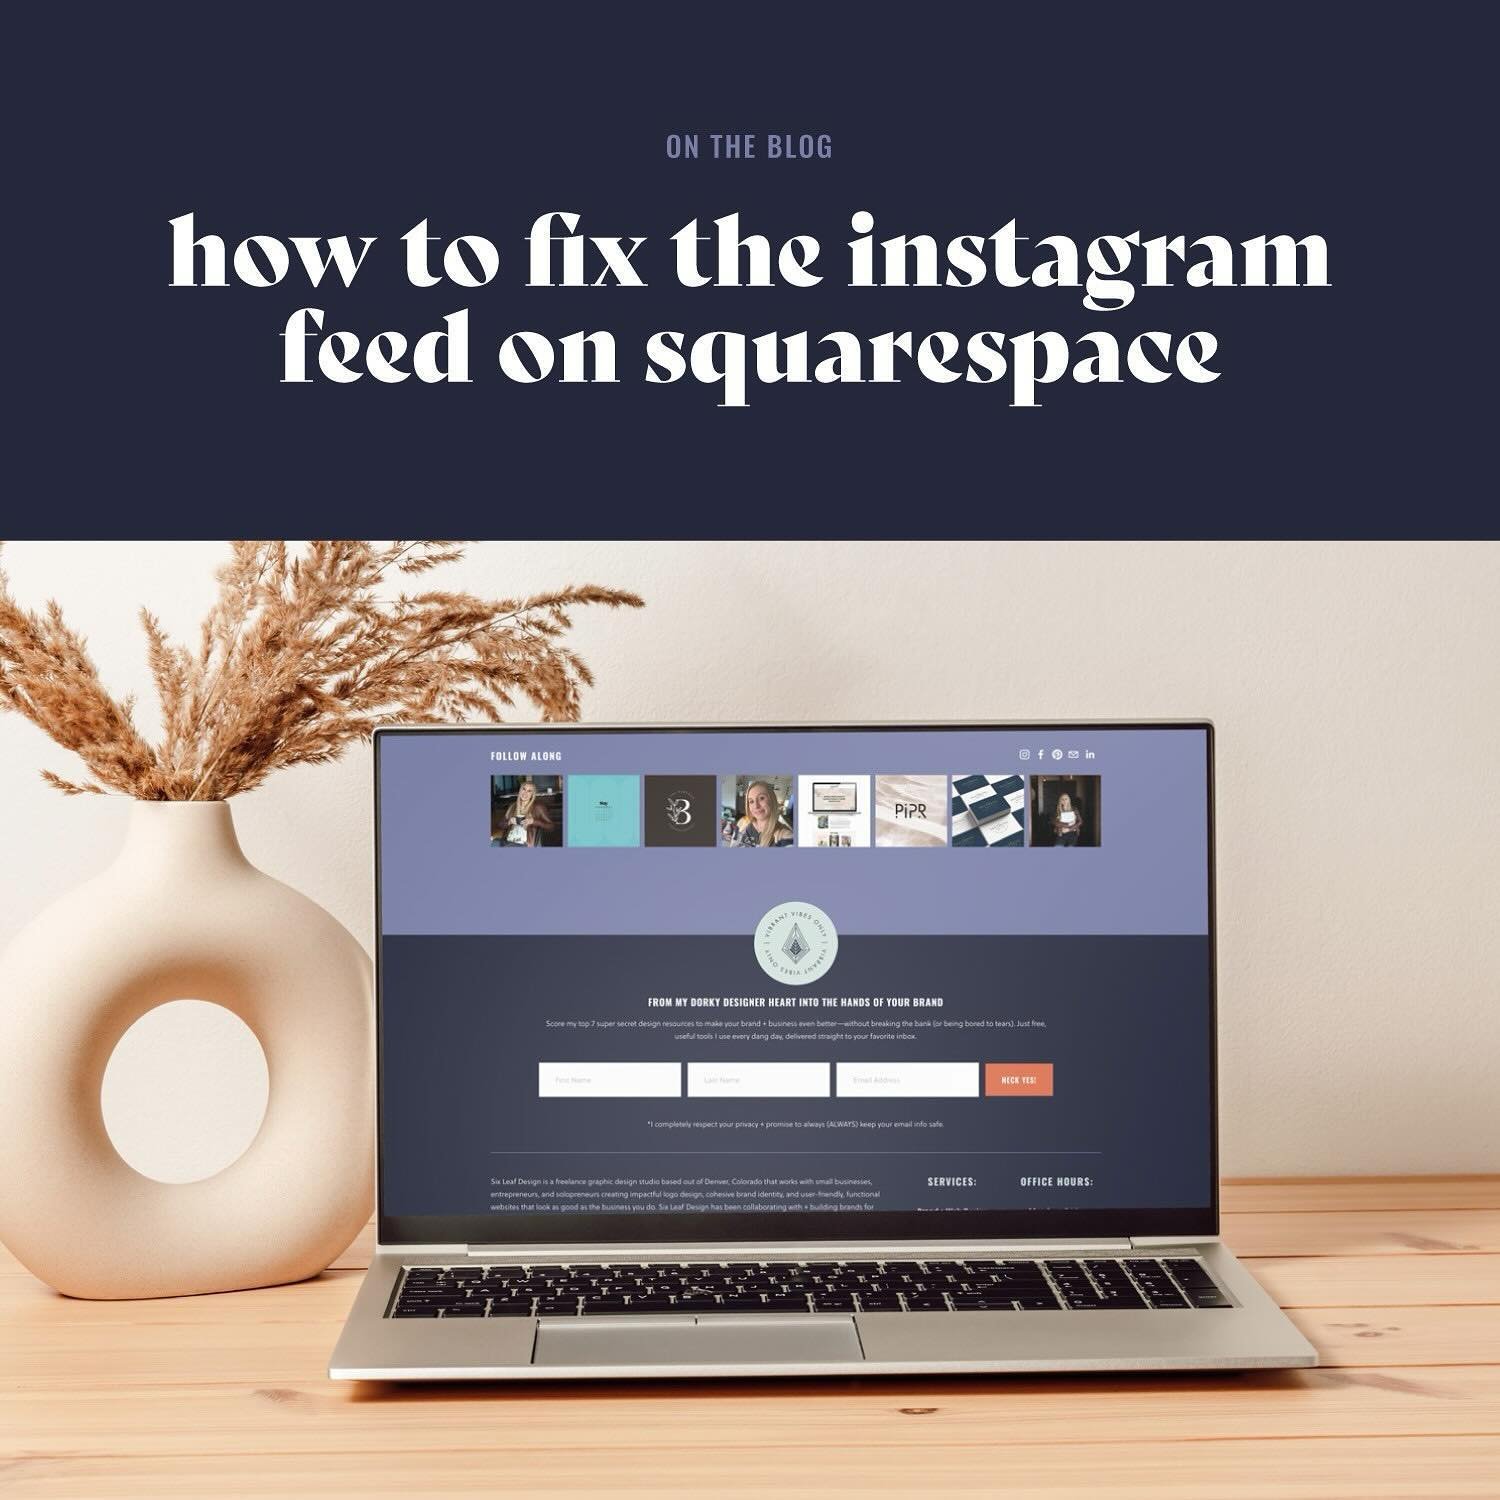 For my Squarespace peeps &mdash; I&rsquo;ve put together a step-by-step guide to show you exactly how to reconnect the Instagram feed block on Squarespace when you notice it&rsquo;s not working. It&rsquo;s not uncommon to have issues with the Instagr